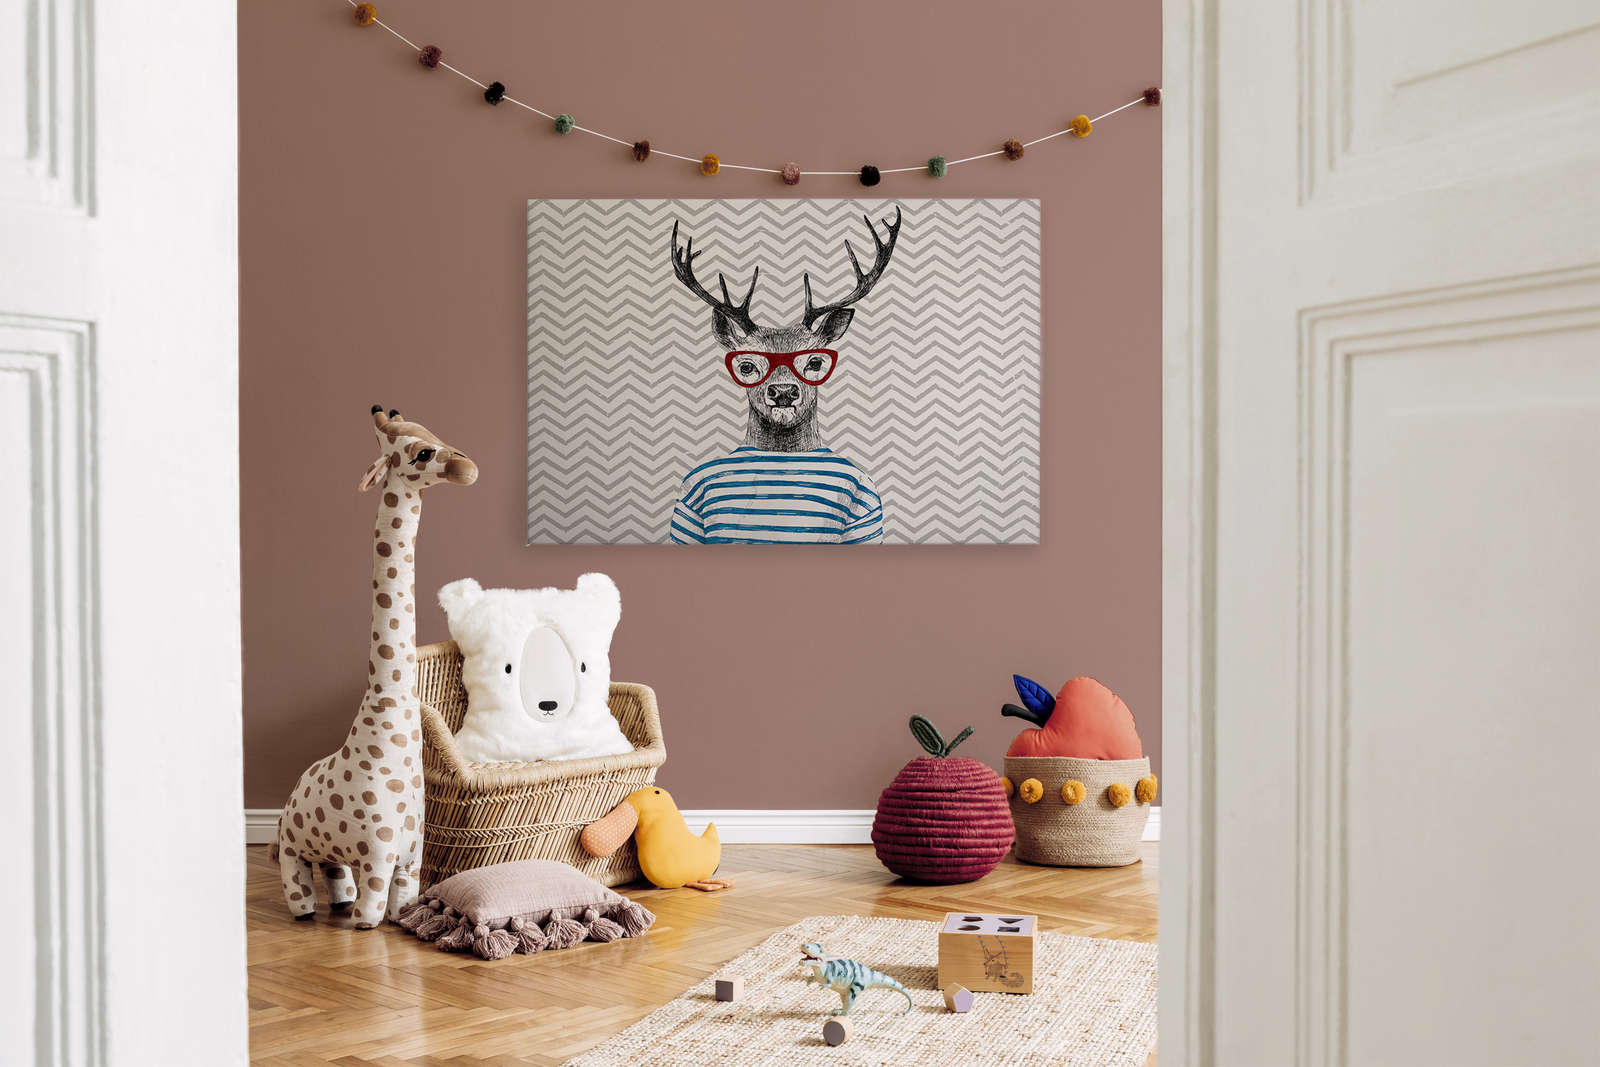             Children's Room Canvas Painting Comic Design, Deer with Glasses - 1.20 m x 0.80 m
        